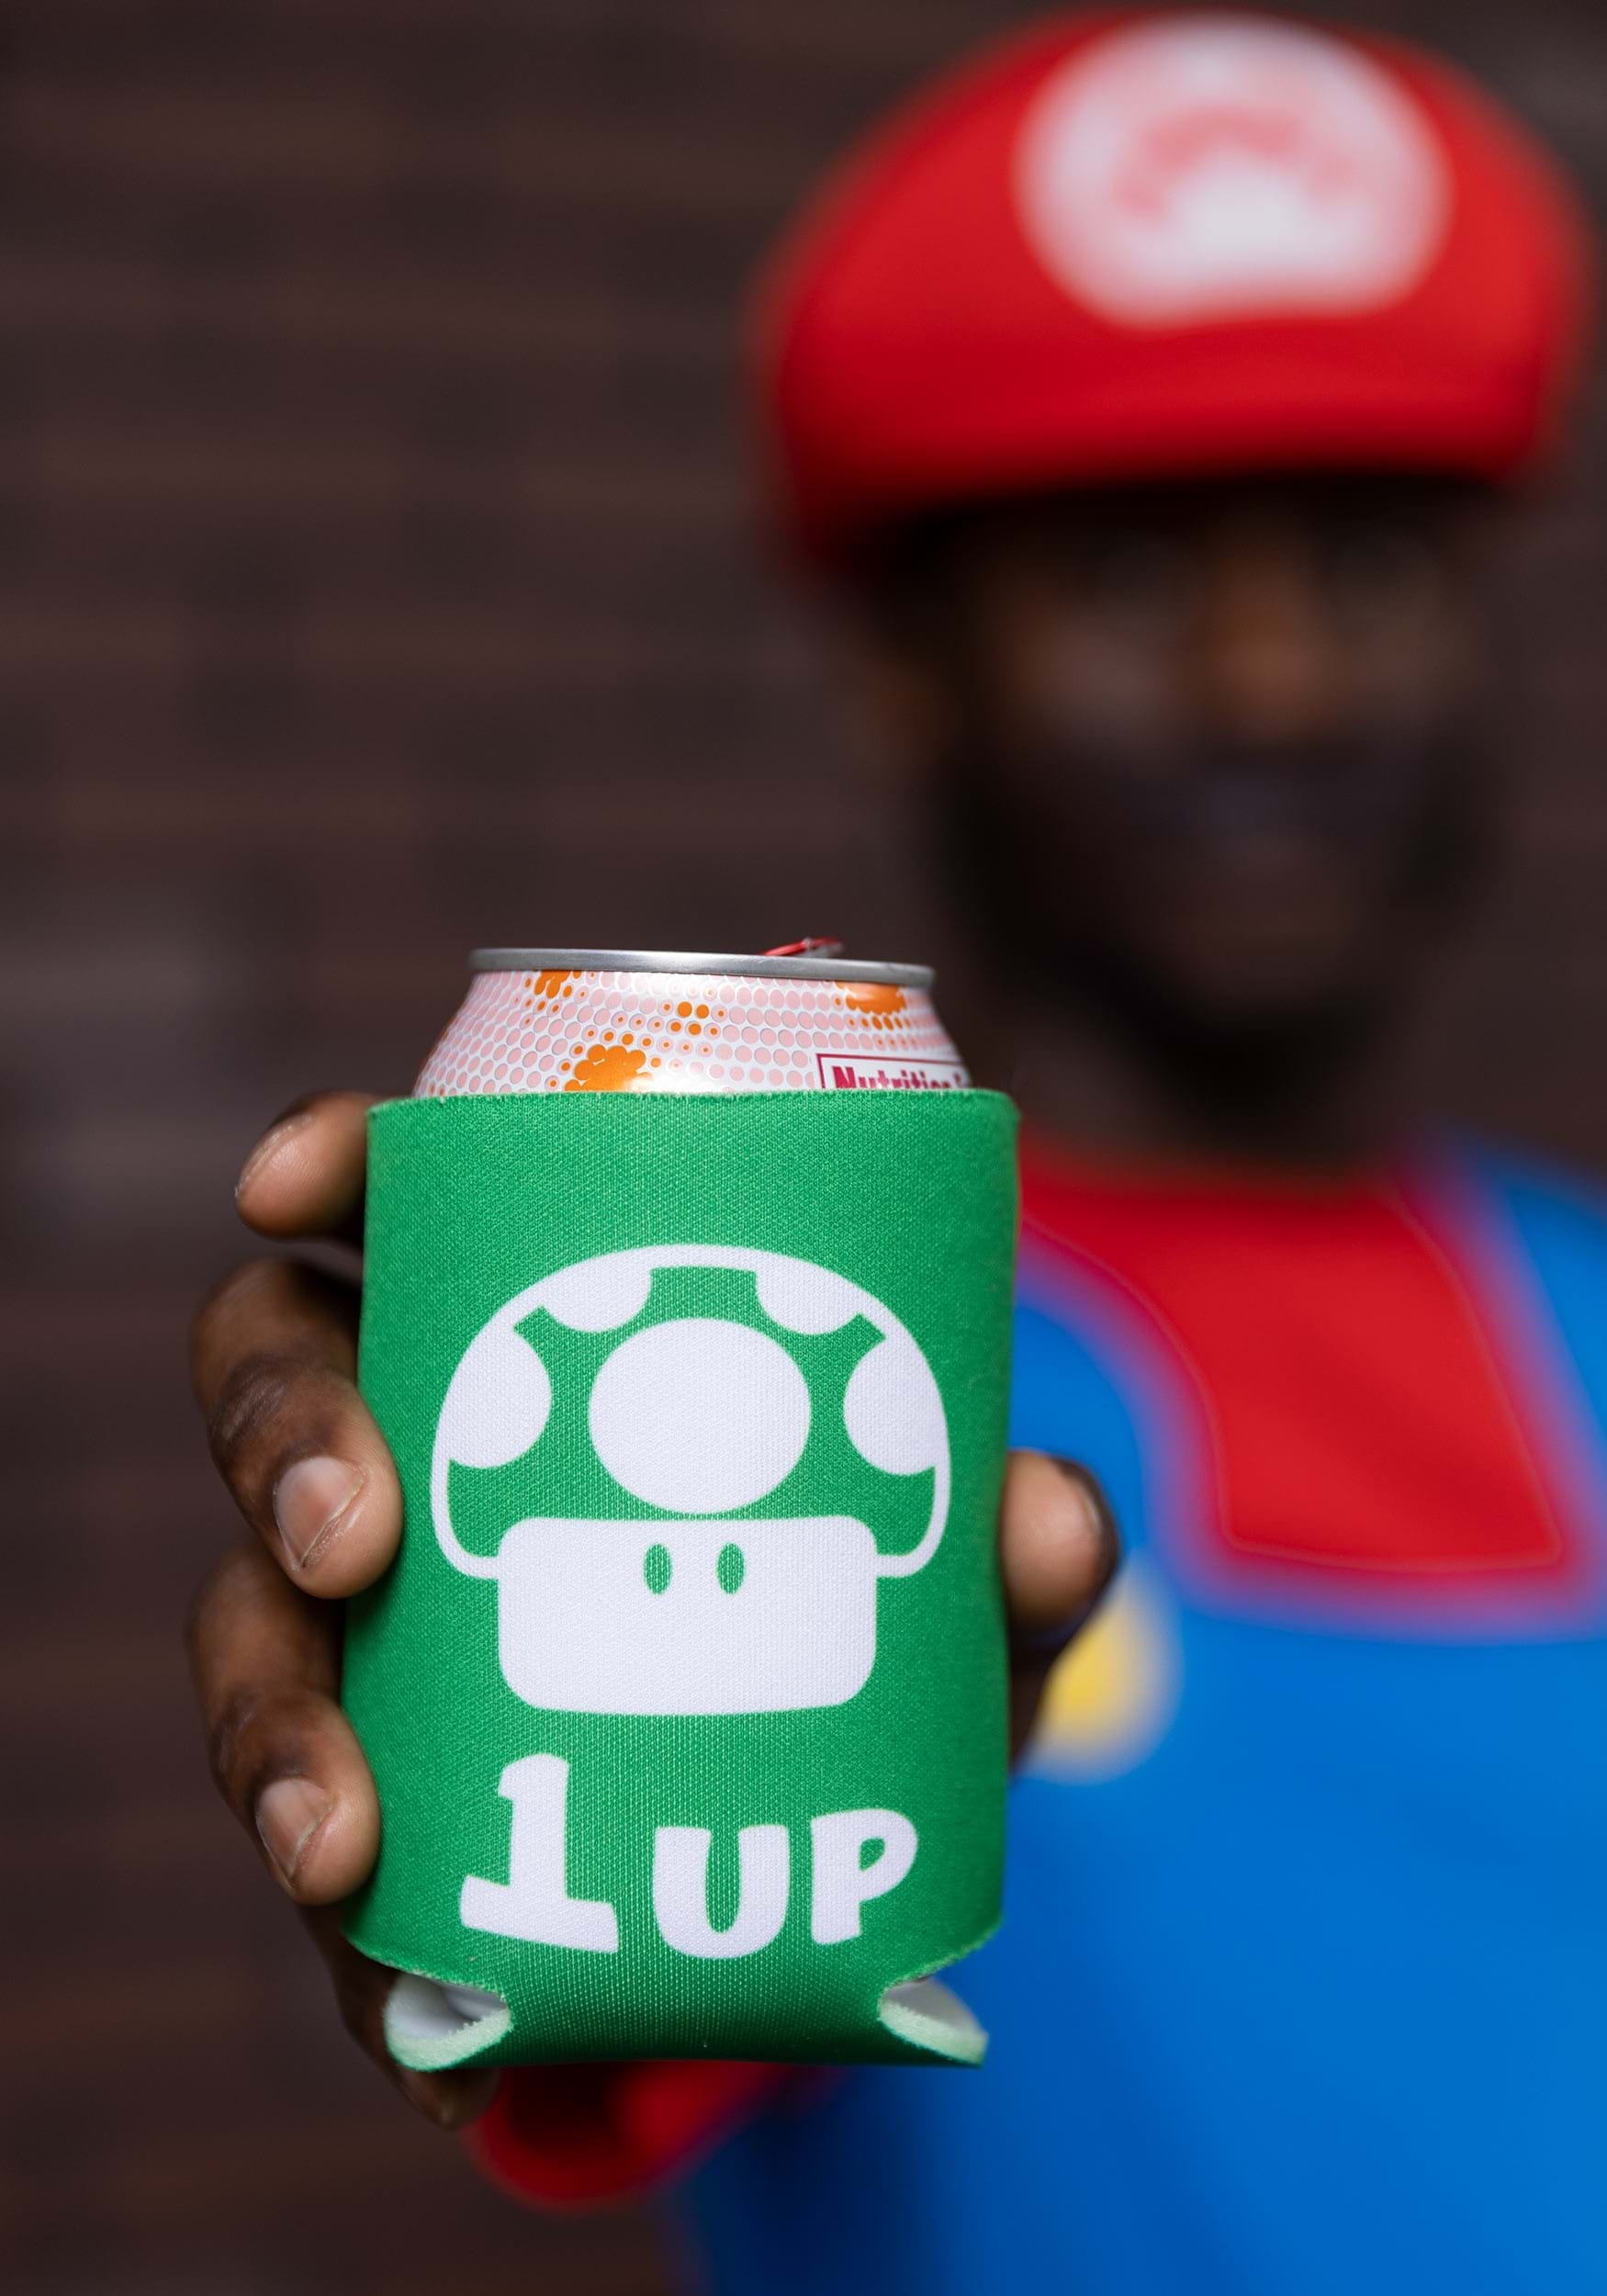 https://images.halloween.com/products/4772/1-1/1-up-mario-can-cooler-upd-1-1.jpg